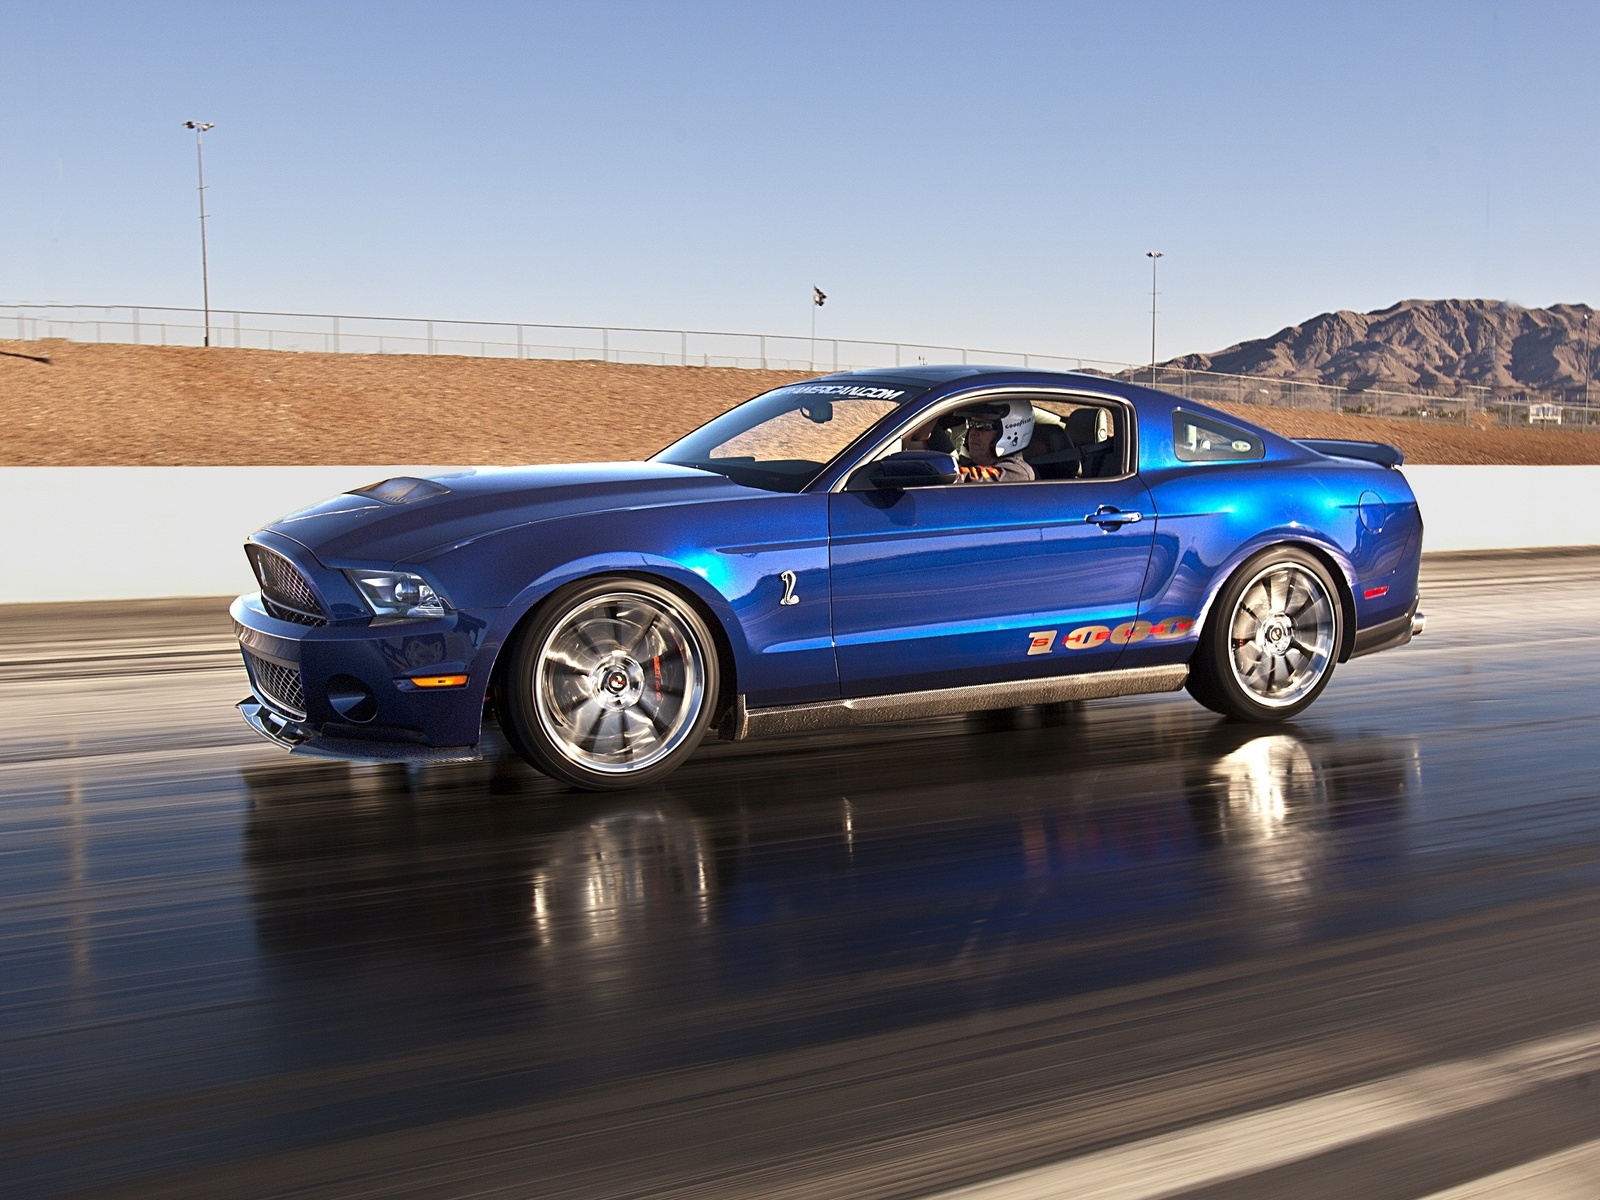 2012, Ford, Mustang, Shelby, 1000, Muscle, Supercar, Supercars, Drag, Racing, Race Wallpaper